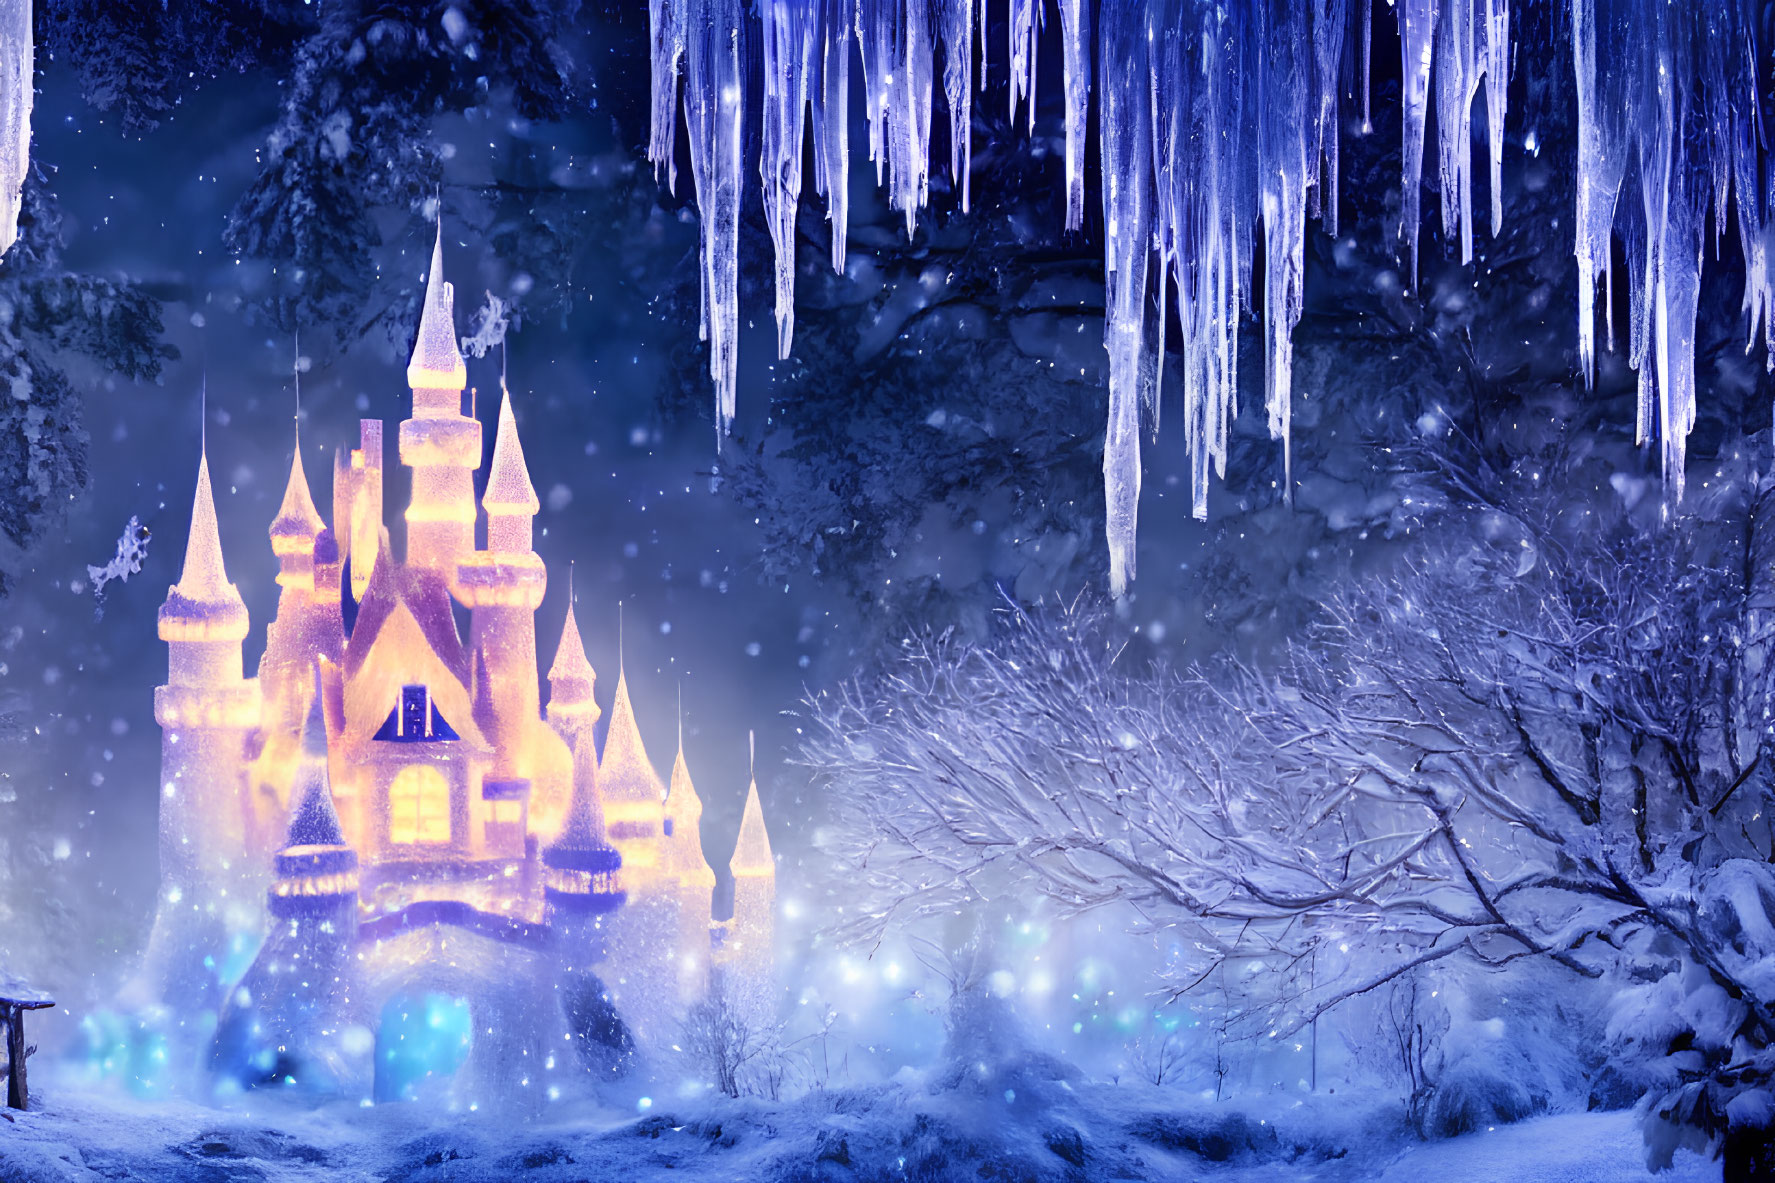 Snowy scene with glowing castle, icy stalactites, frost-covered tree, and blue light.